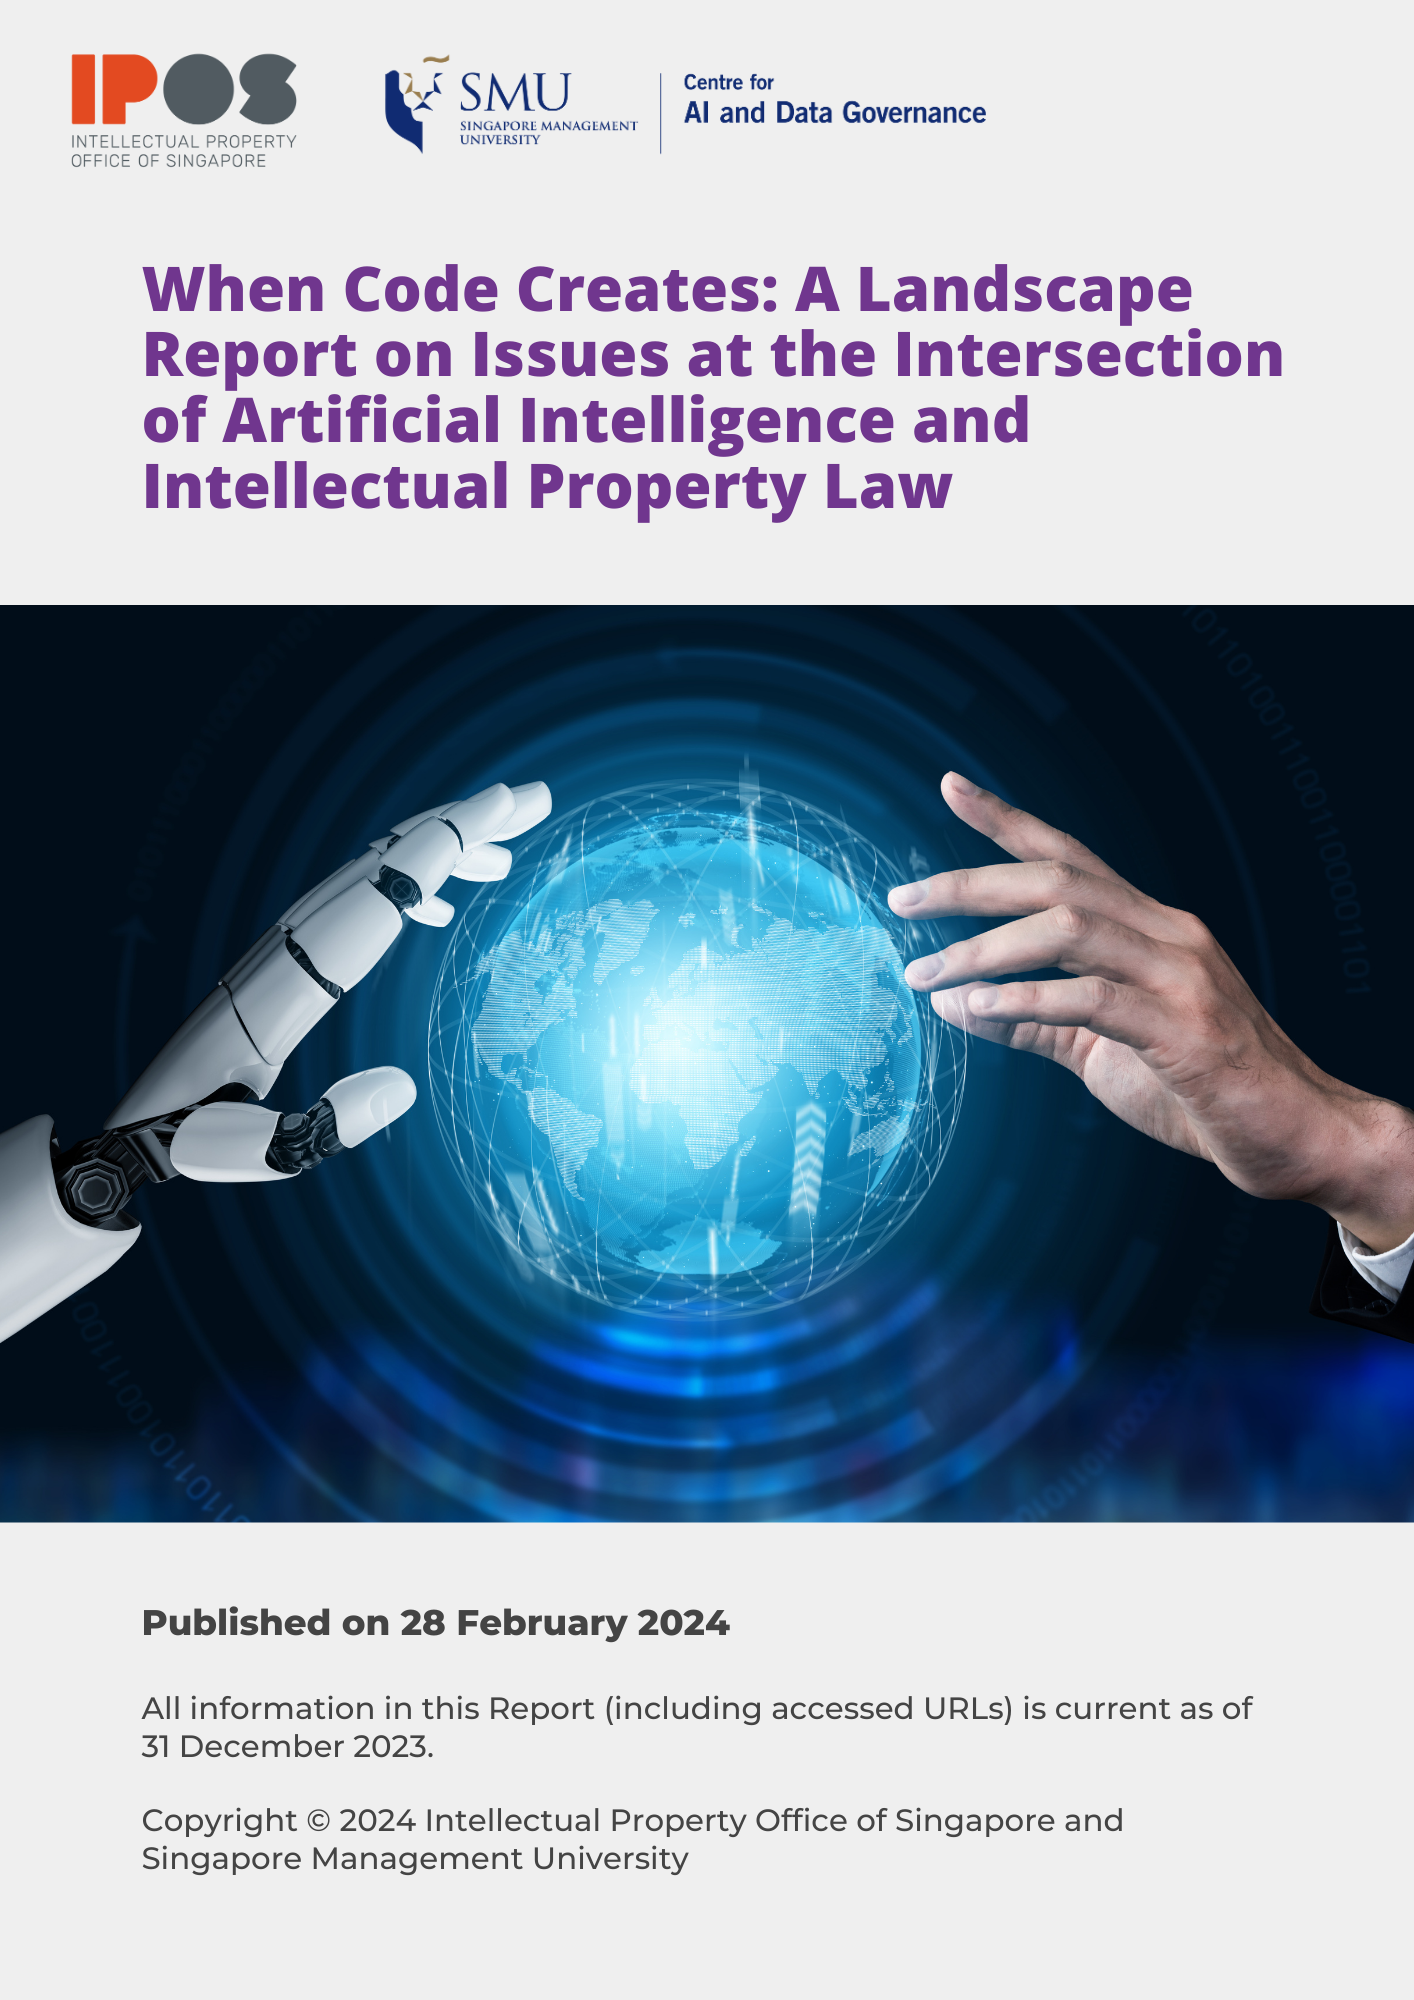 When Code Creates: A Landscape Report on Issues at the Intersection of Artificial Intelligence and Intellectual Property Law